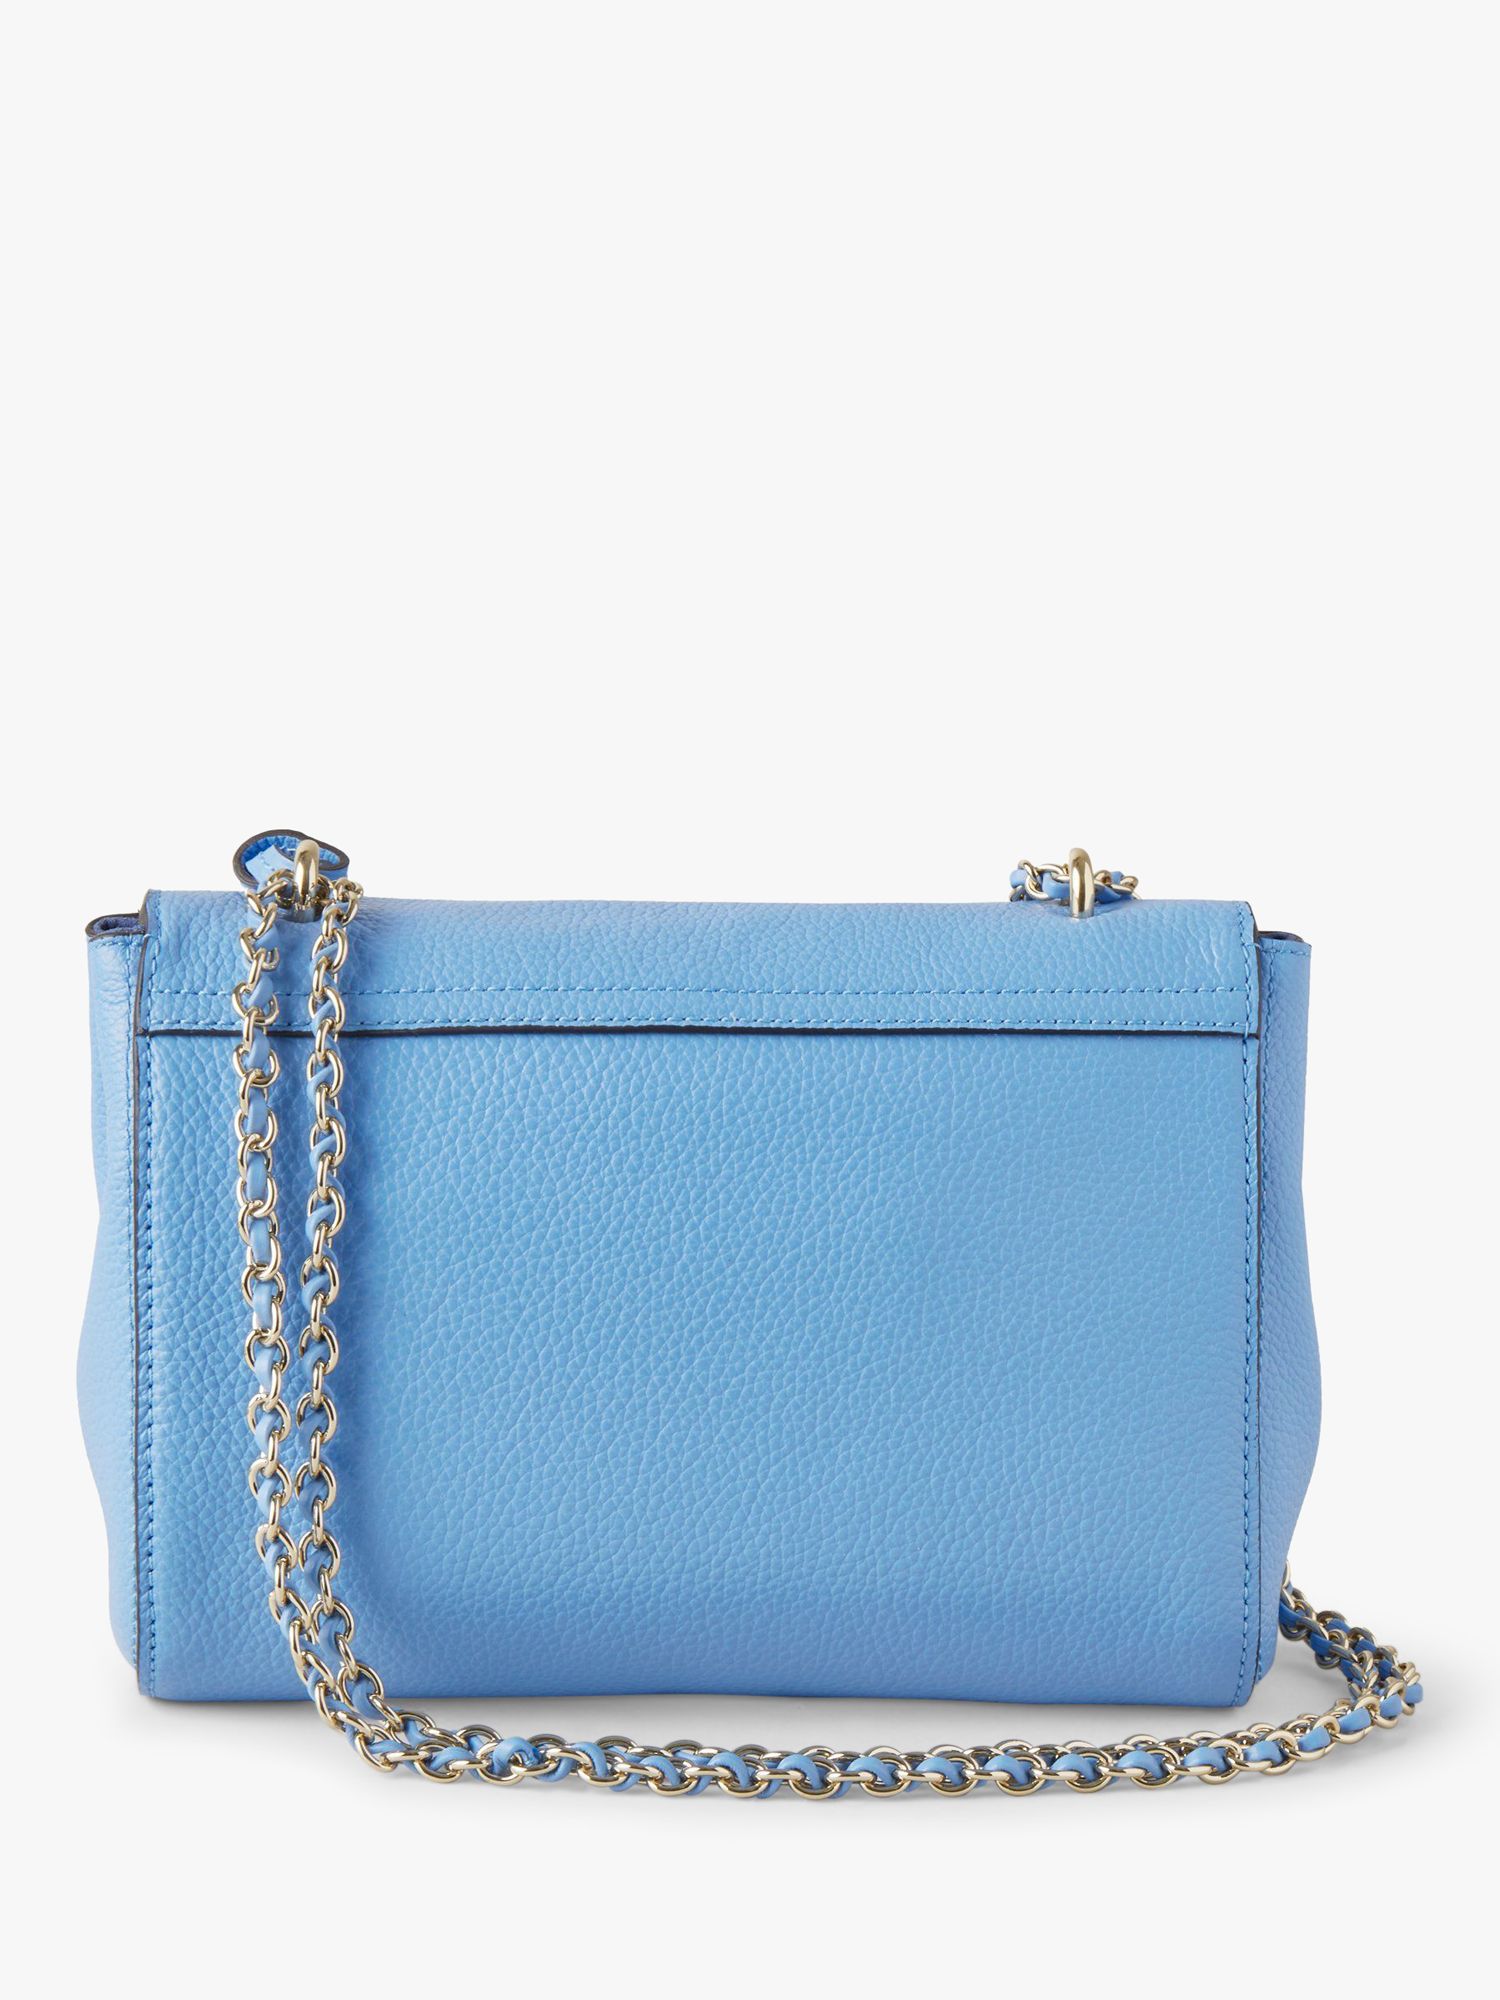 Mulberry Lily Classic Grain Leather Shoulder Bag, Cornflower Blue at ...